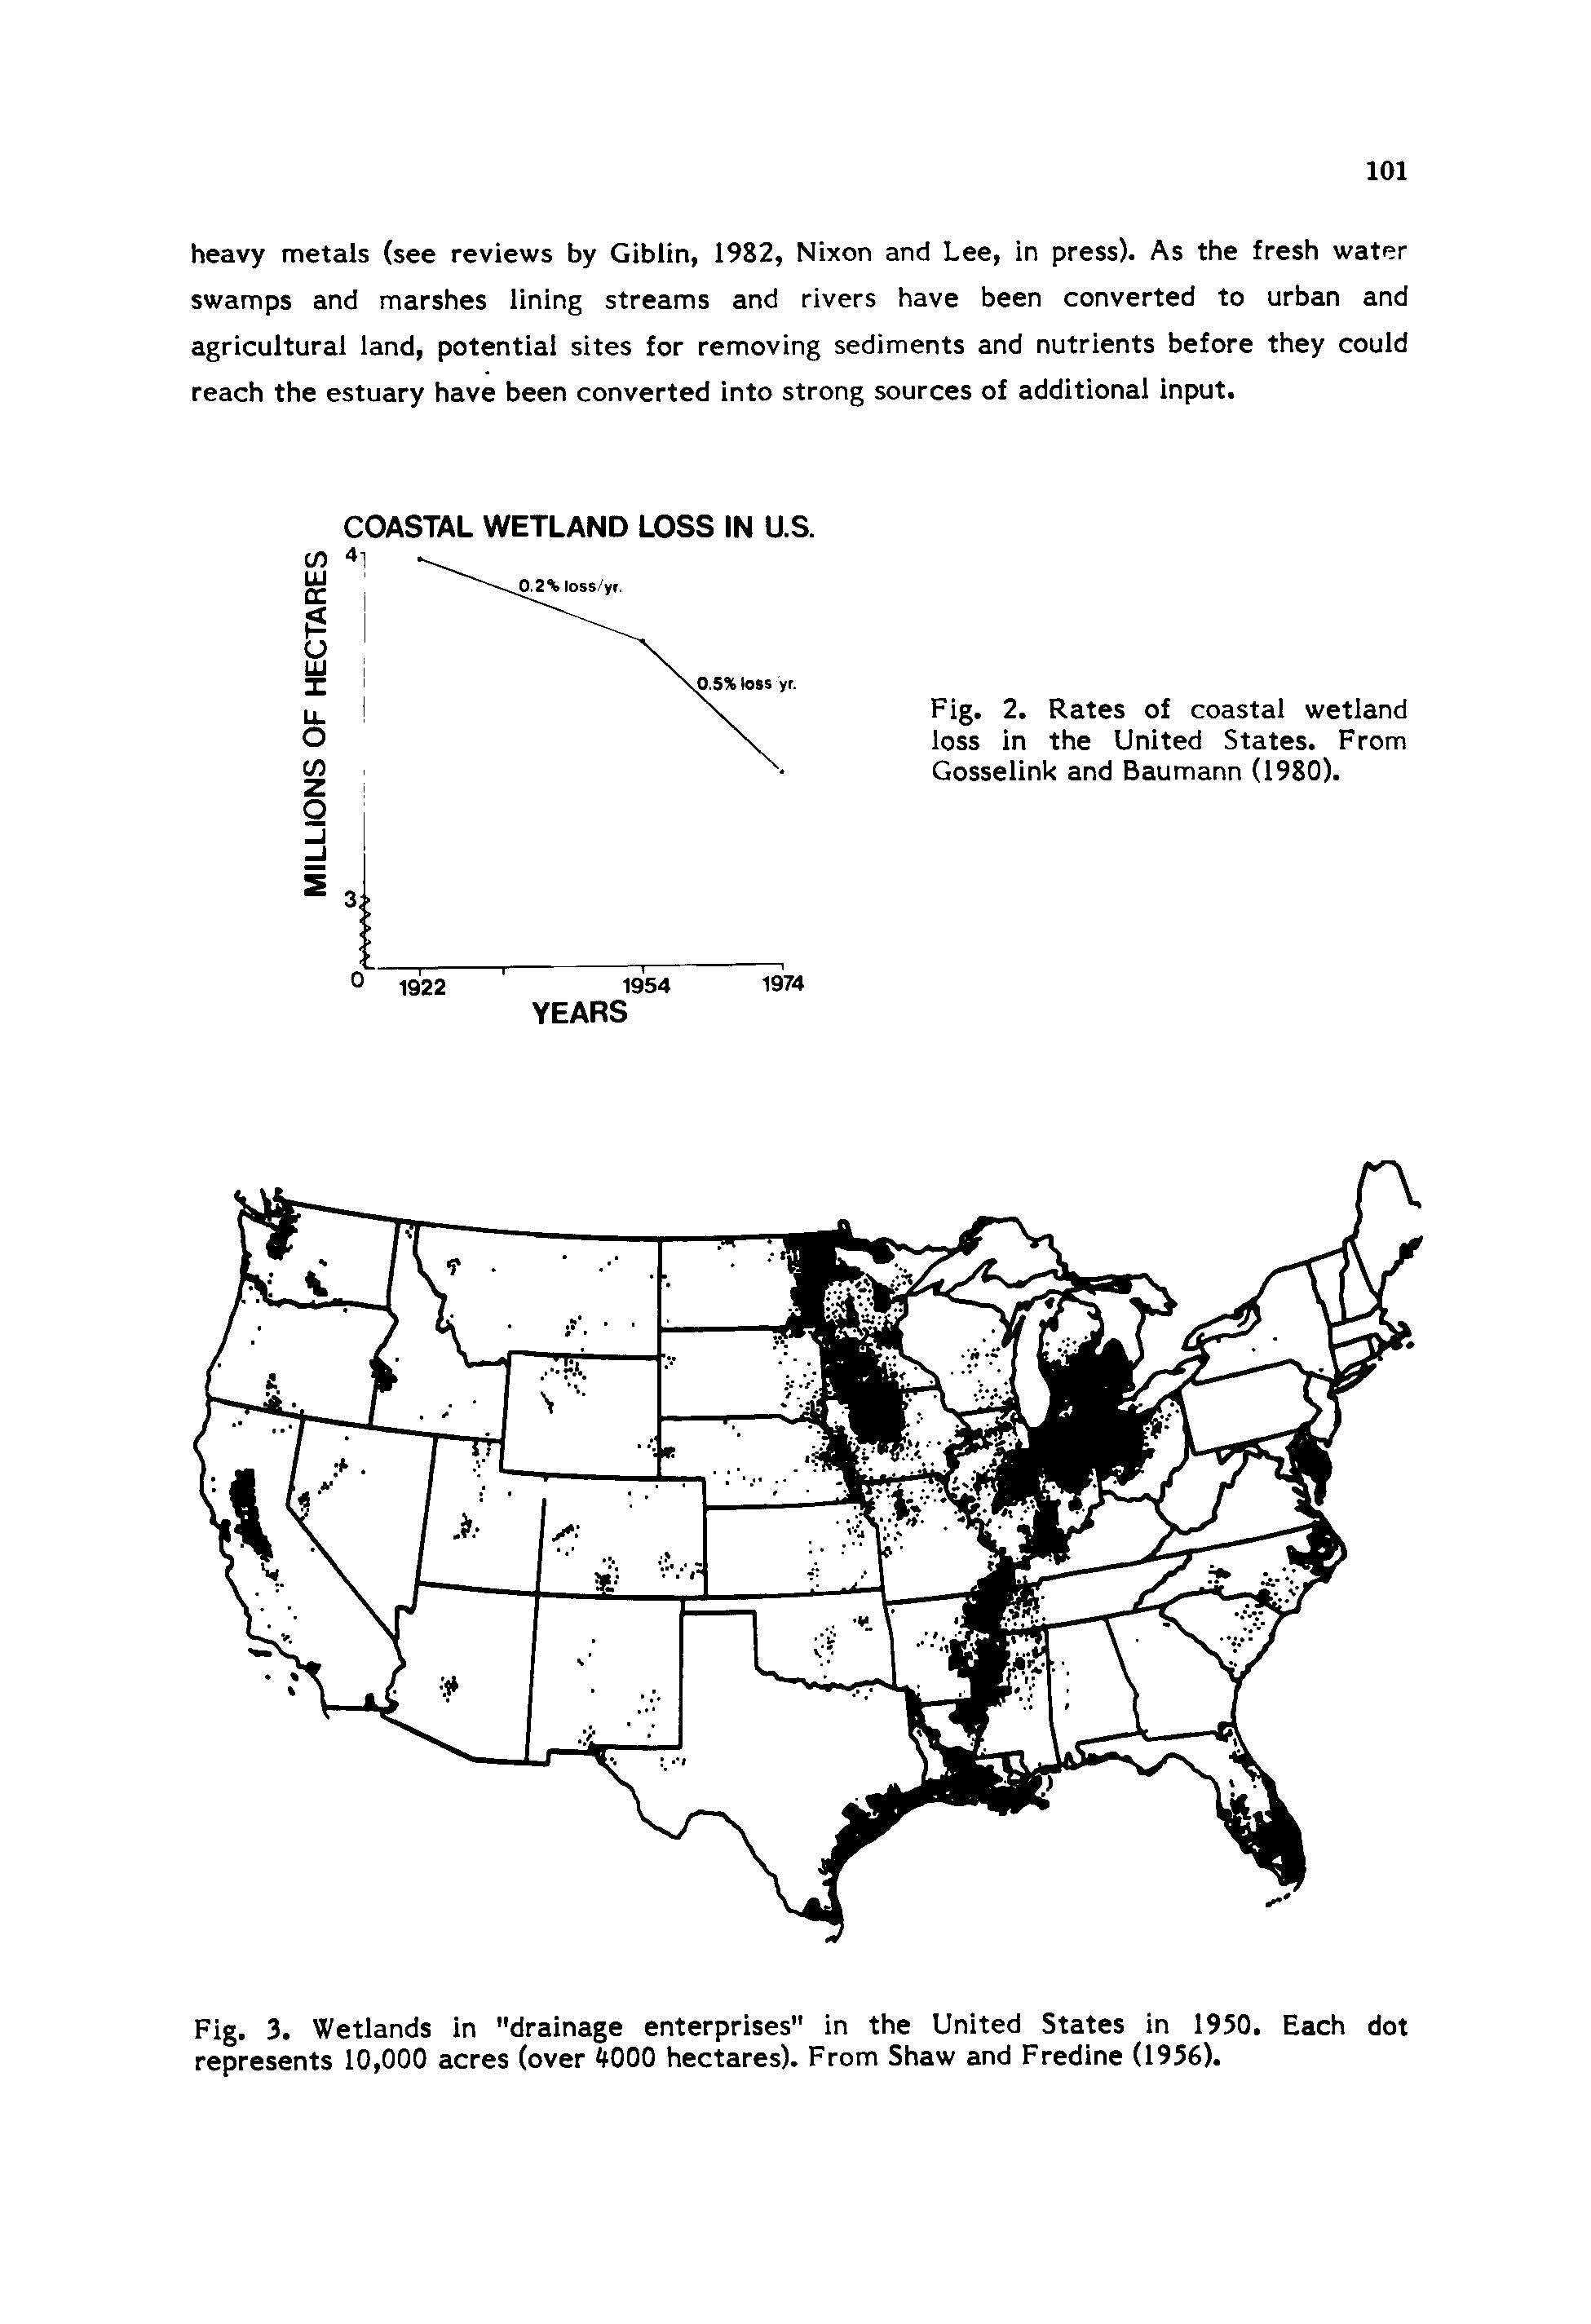 Fig. 2. Rates of coastal wetland loss in the United States. From Gosselink and Baumann (1980).